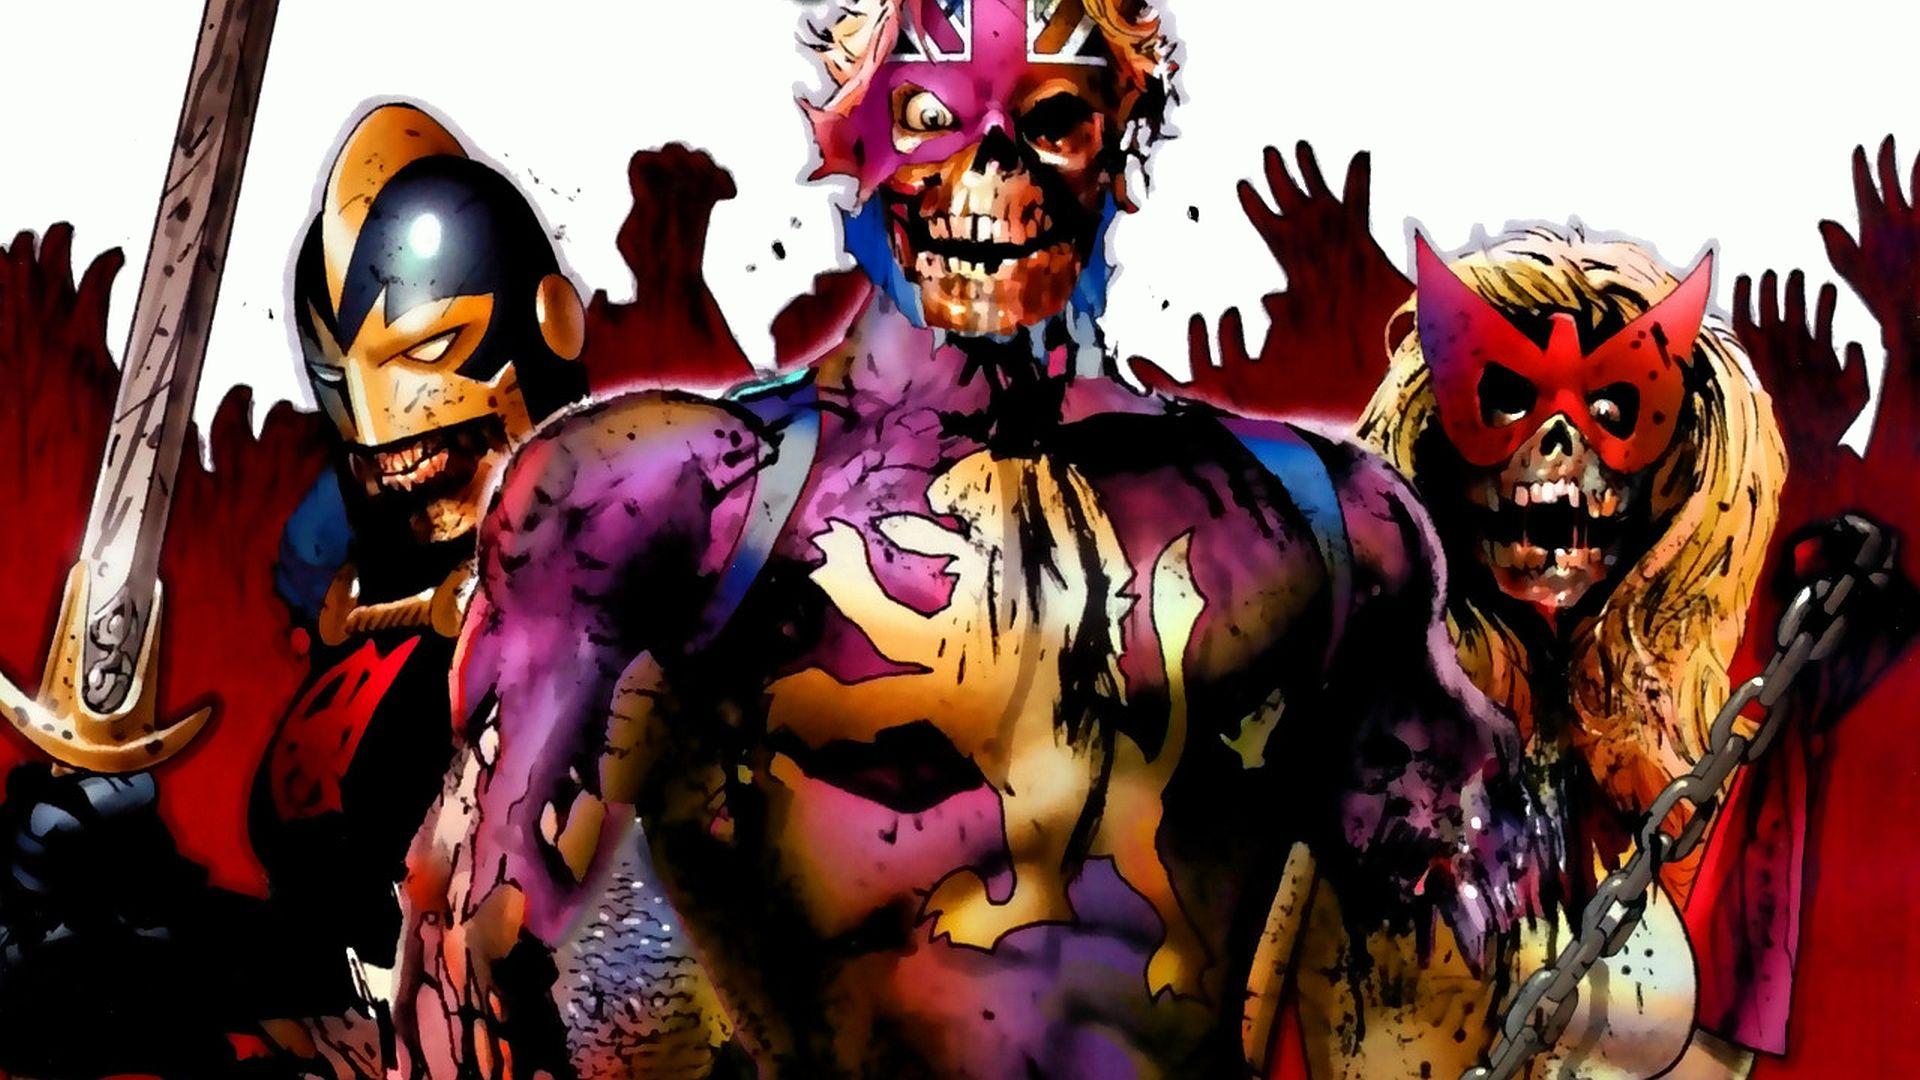 Marvel Zombies Full HD Wallpapers and Backgrounds Image.